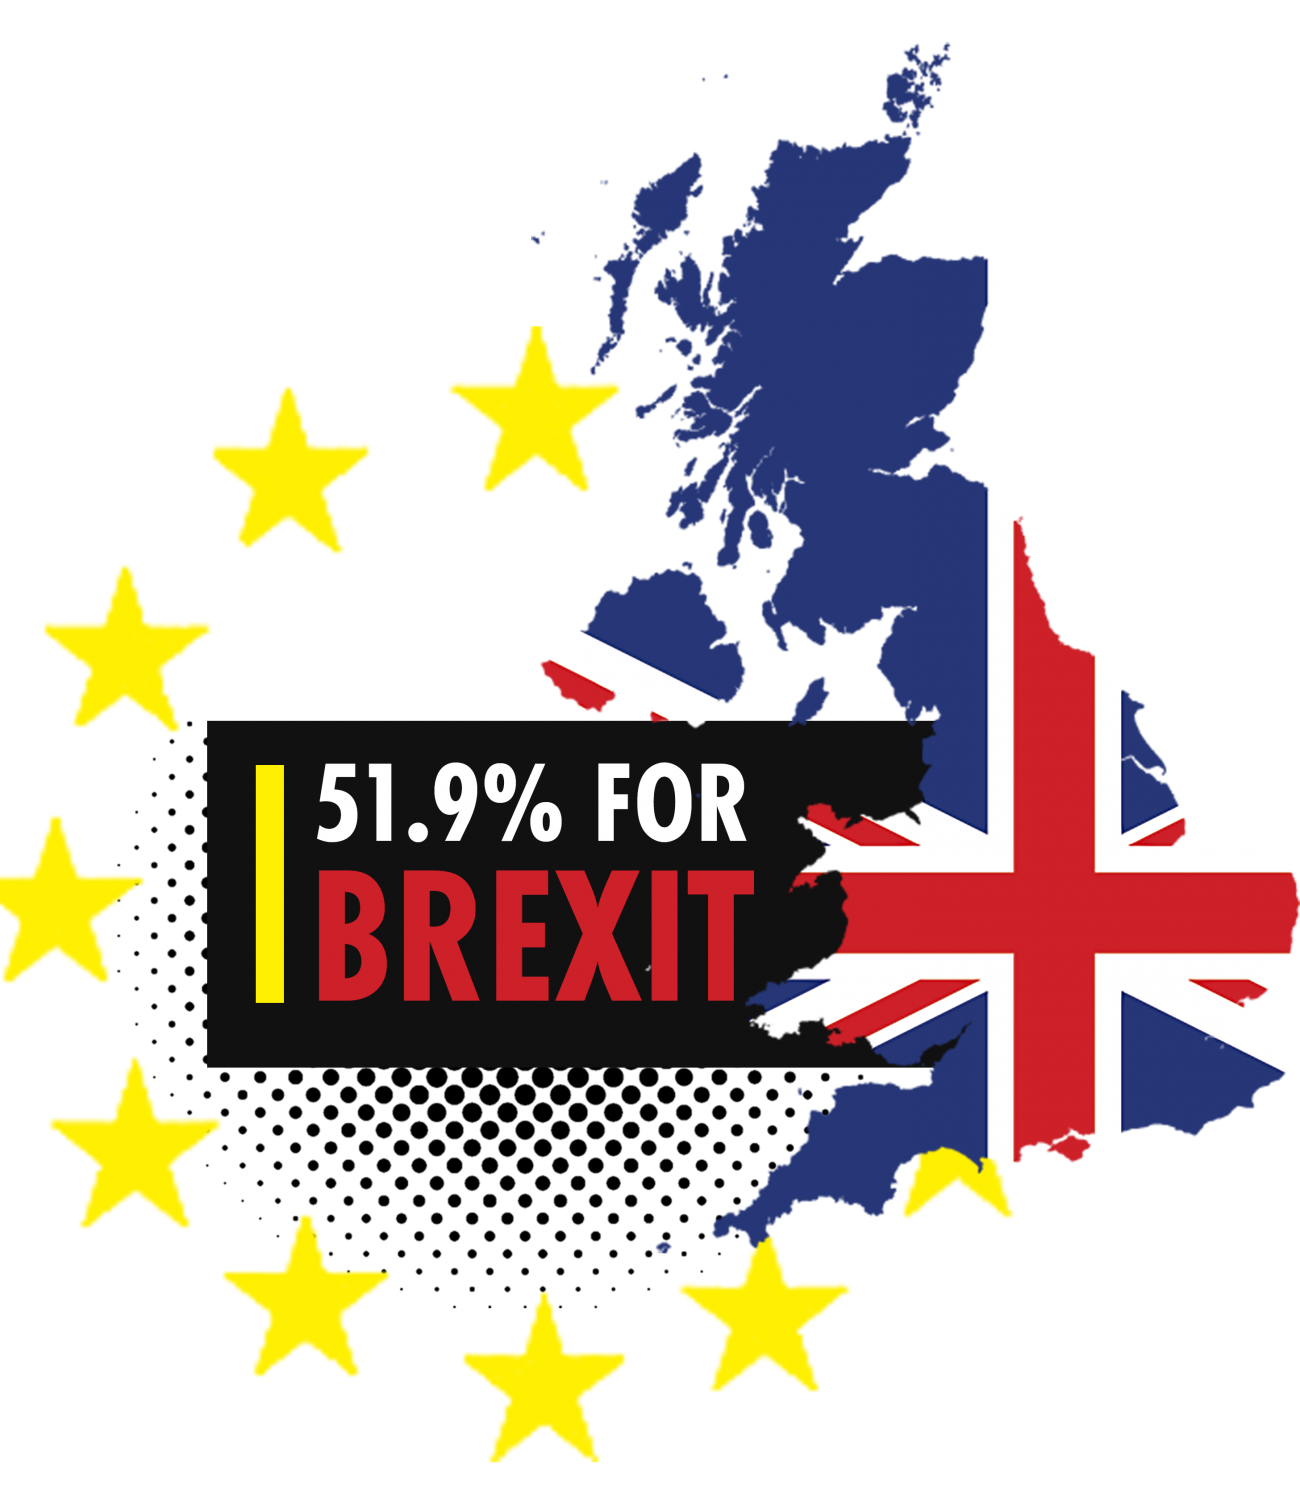 by-striking-a-deal-with-the-eu-on-brexit-the-uk-would-suffer-the